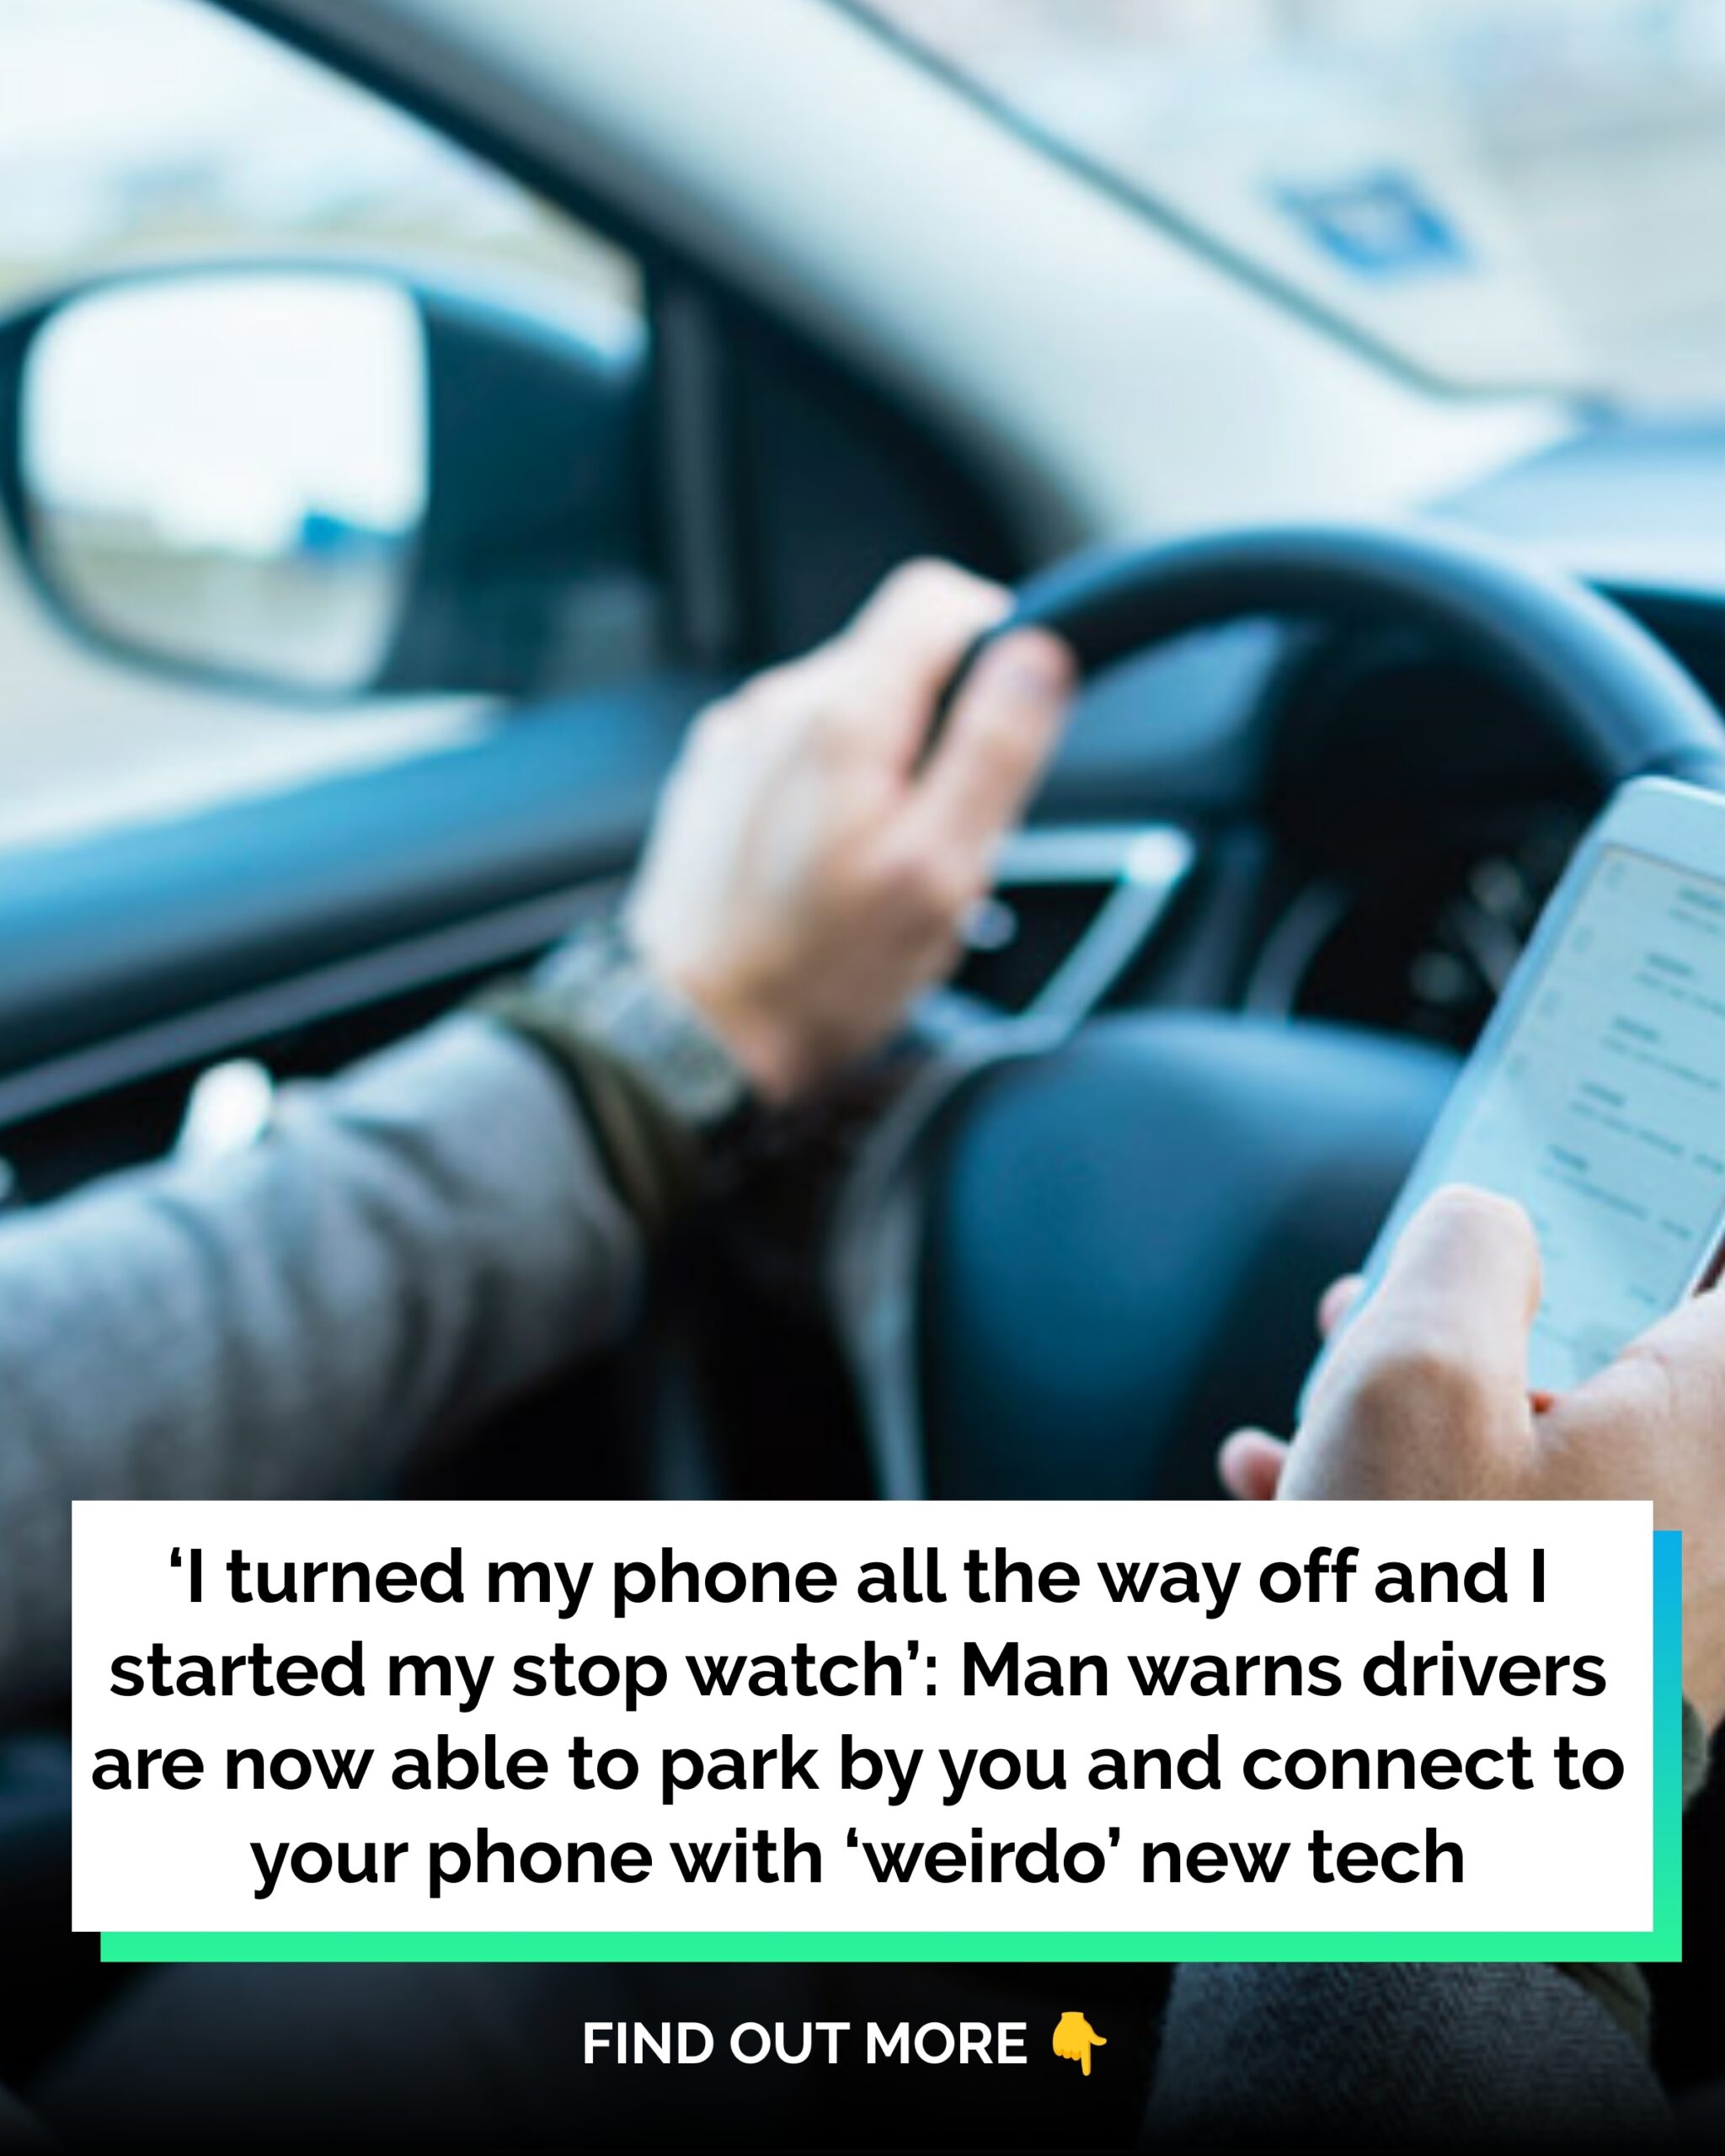 ‘I turned my phone all the way off and I started my stop watch’: Man warns drivers are now able to park by you and connect to your phone with ‘weirdo’ new tech